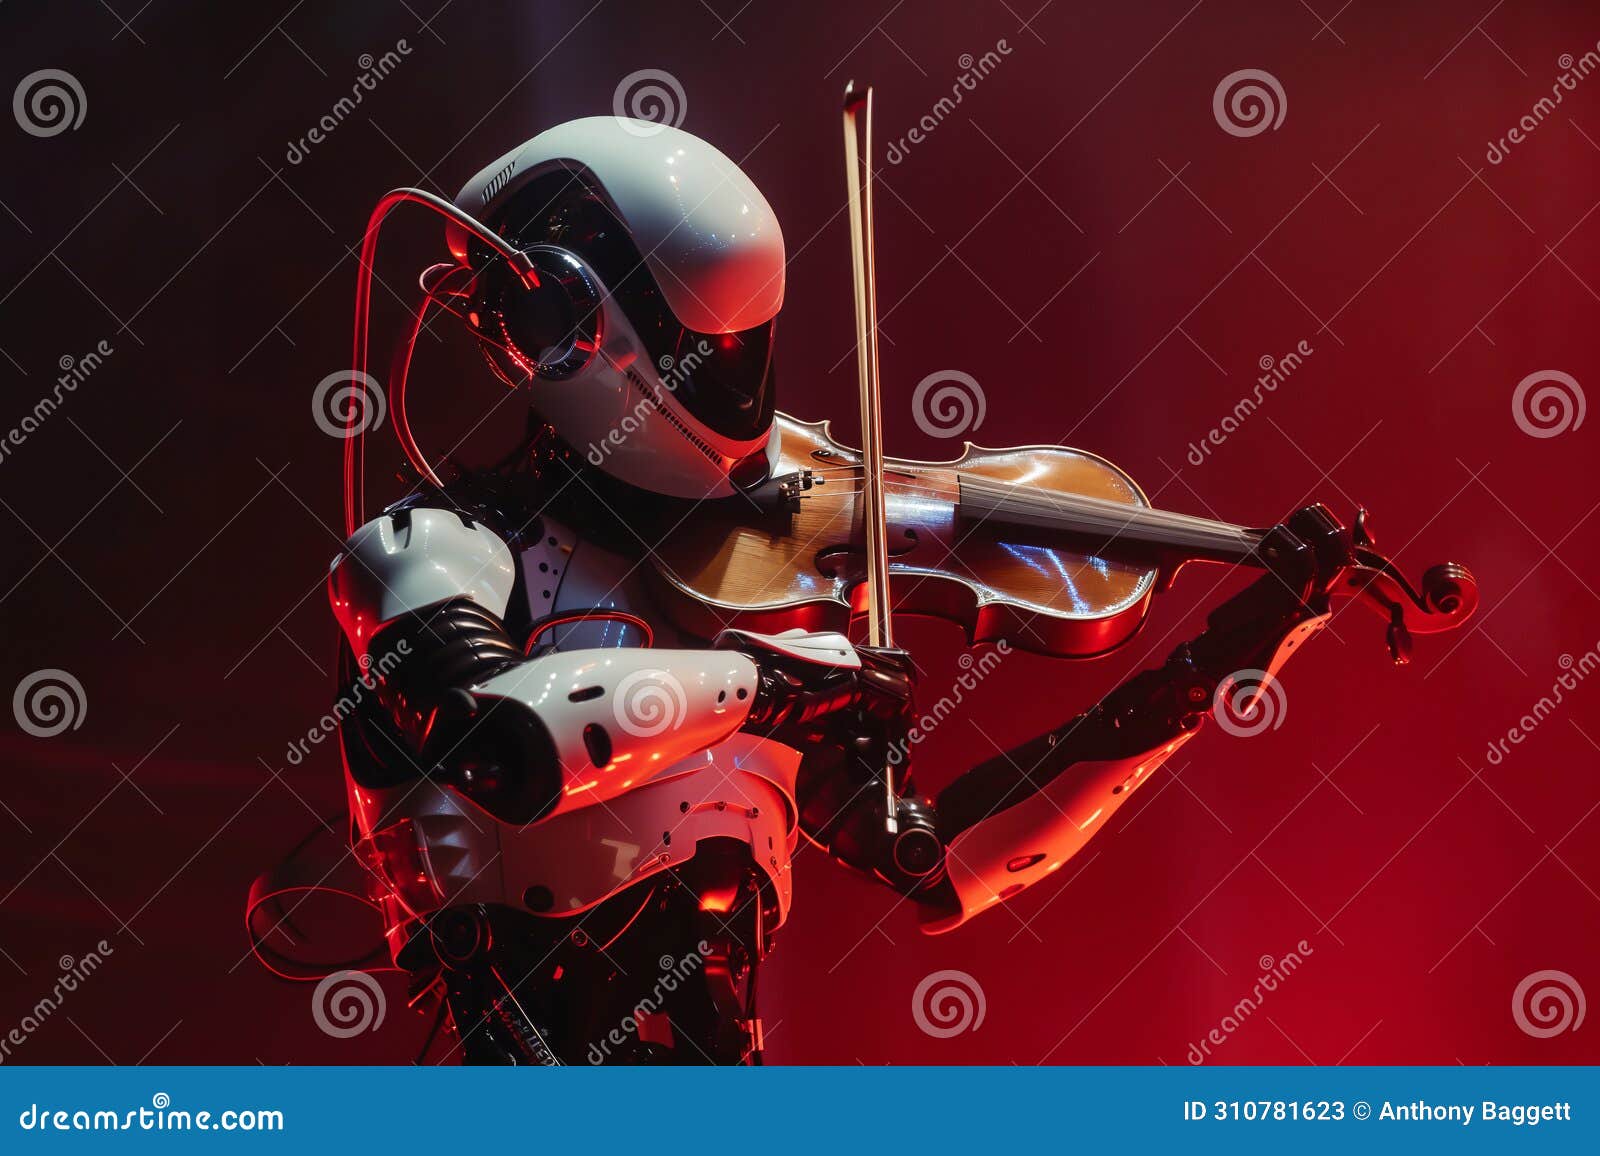 an android robot playing a violin at an orchestral classical music concert performing as part of the orchestra